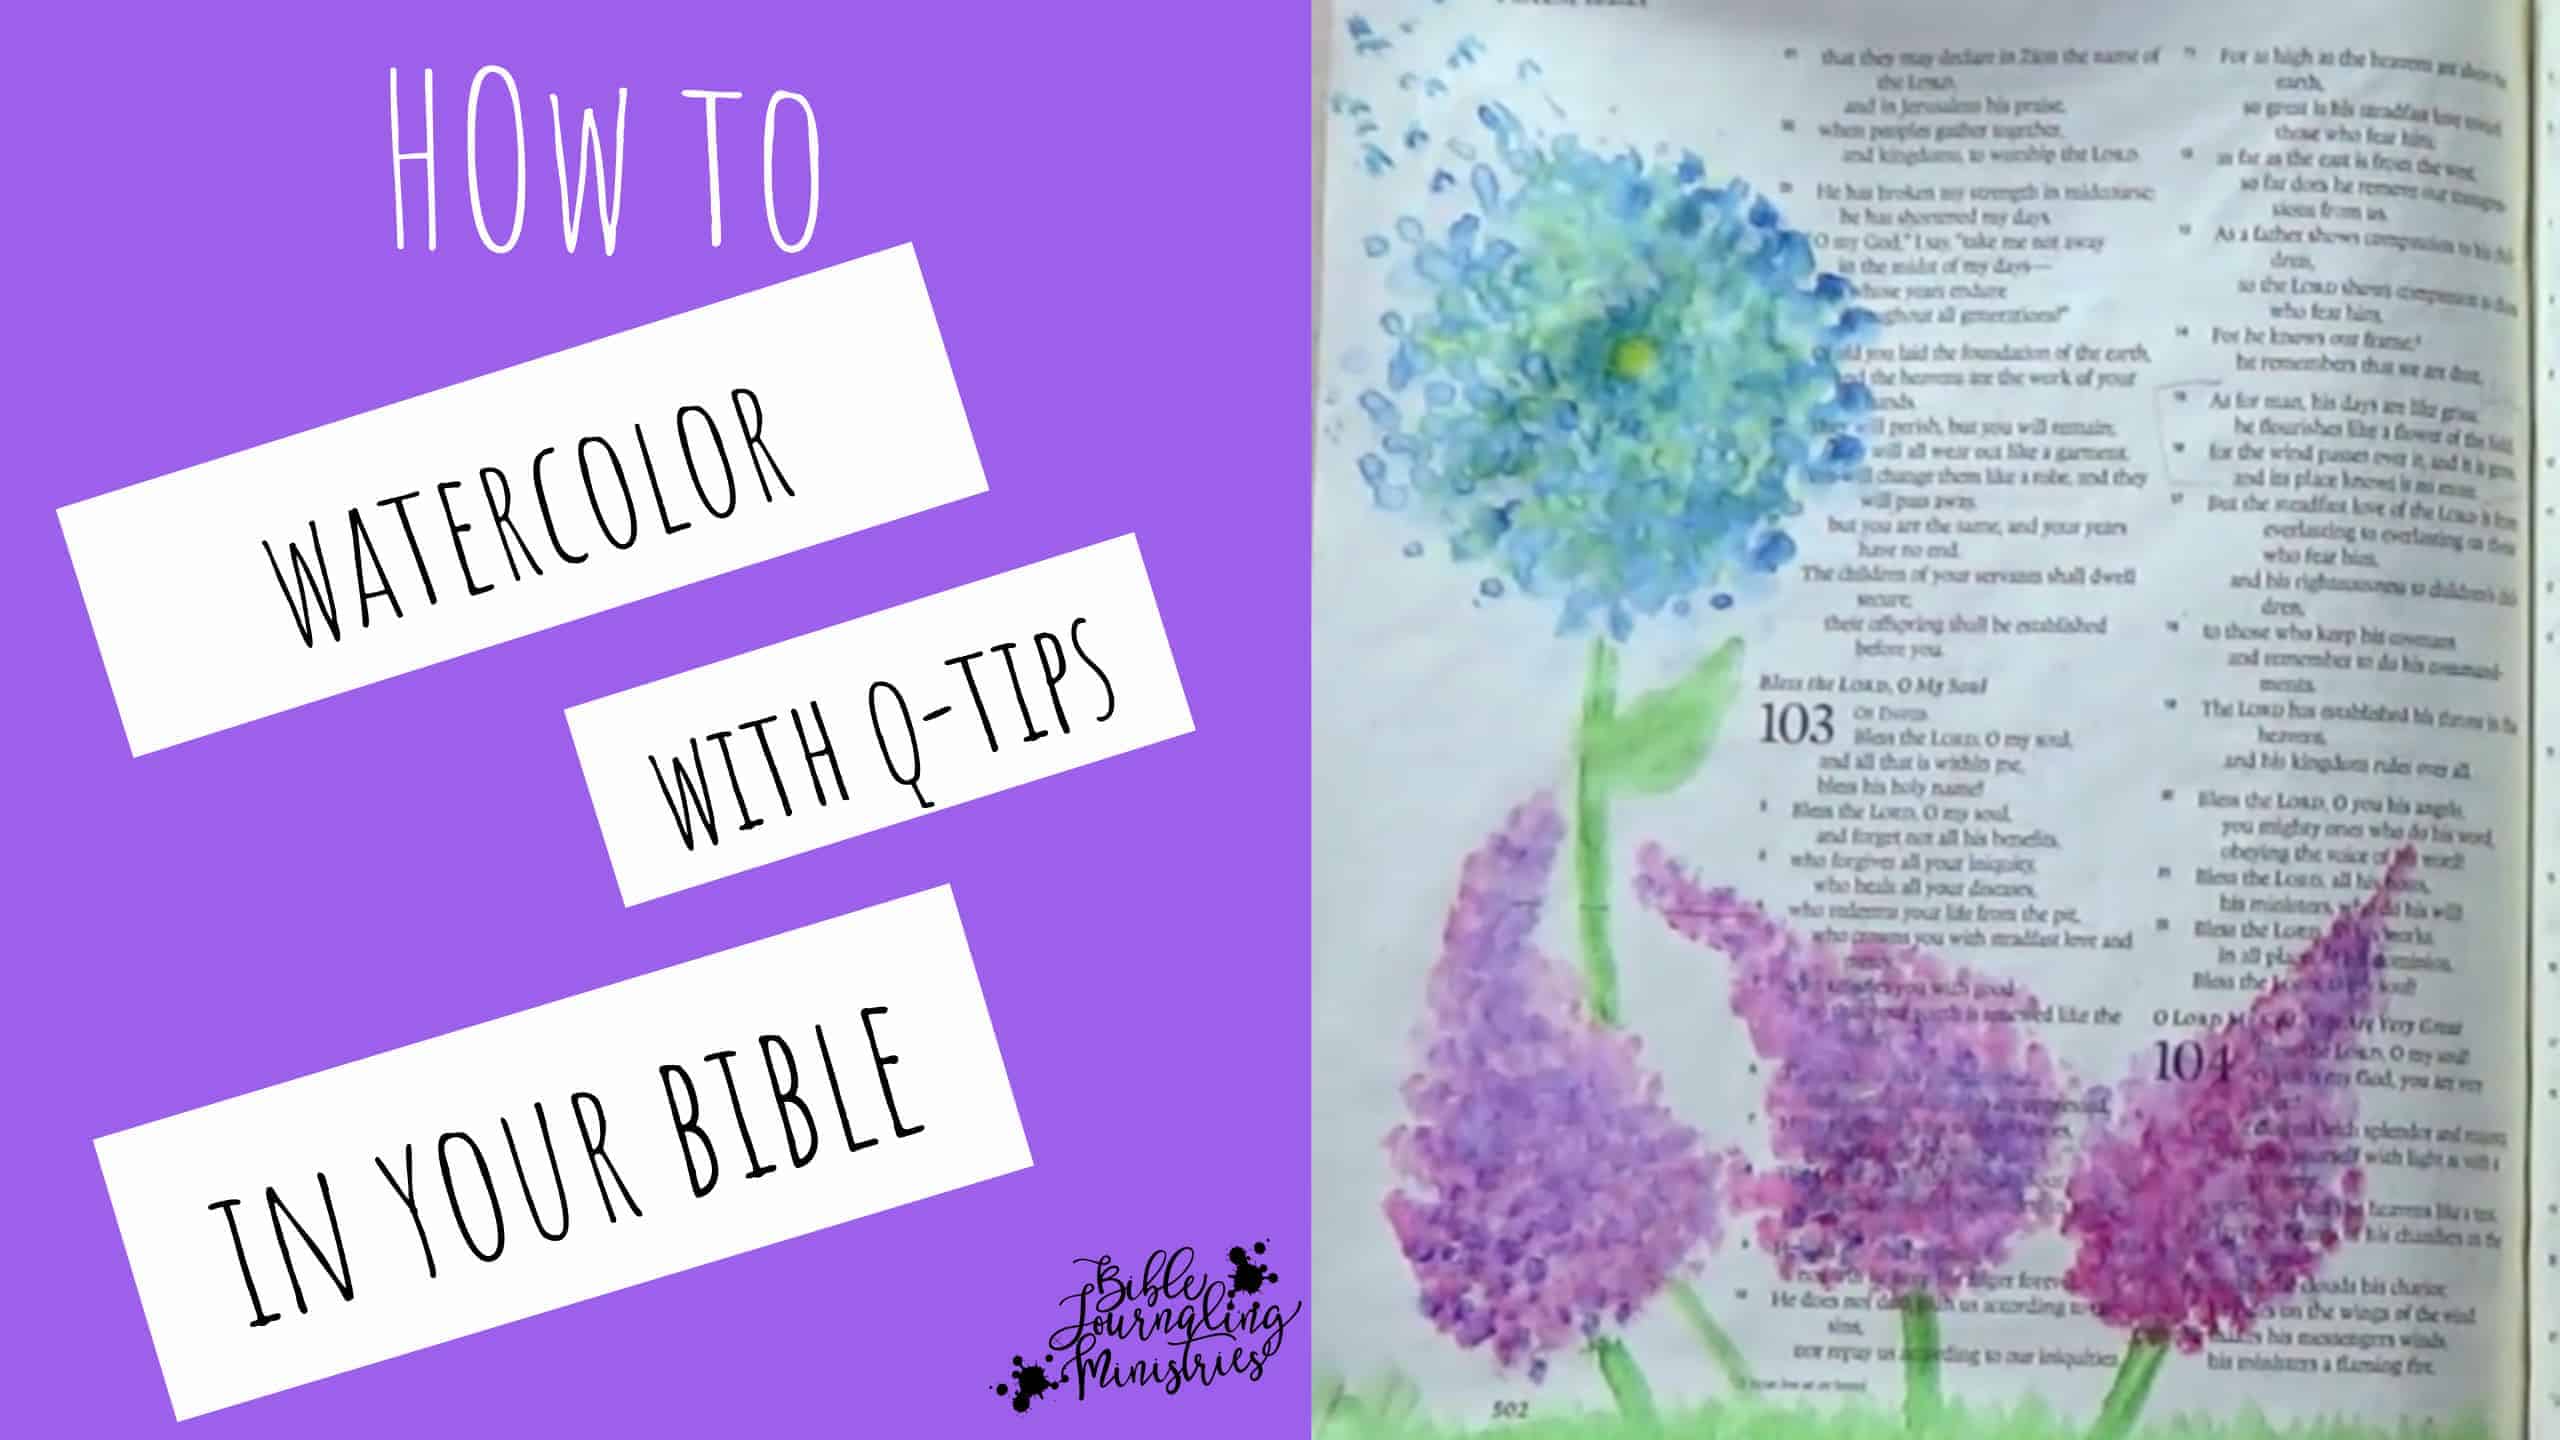 How to Make Watercolor Flowers in your Bible